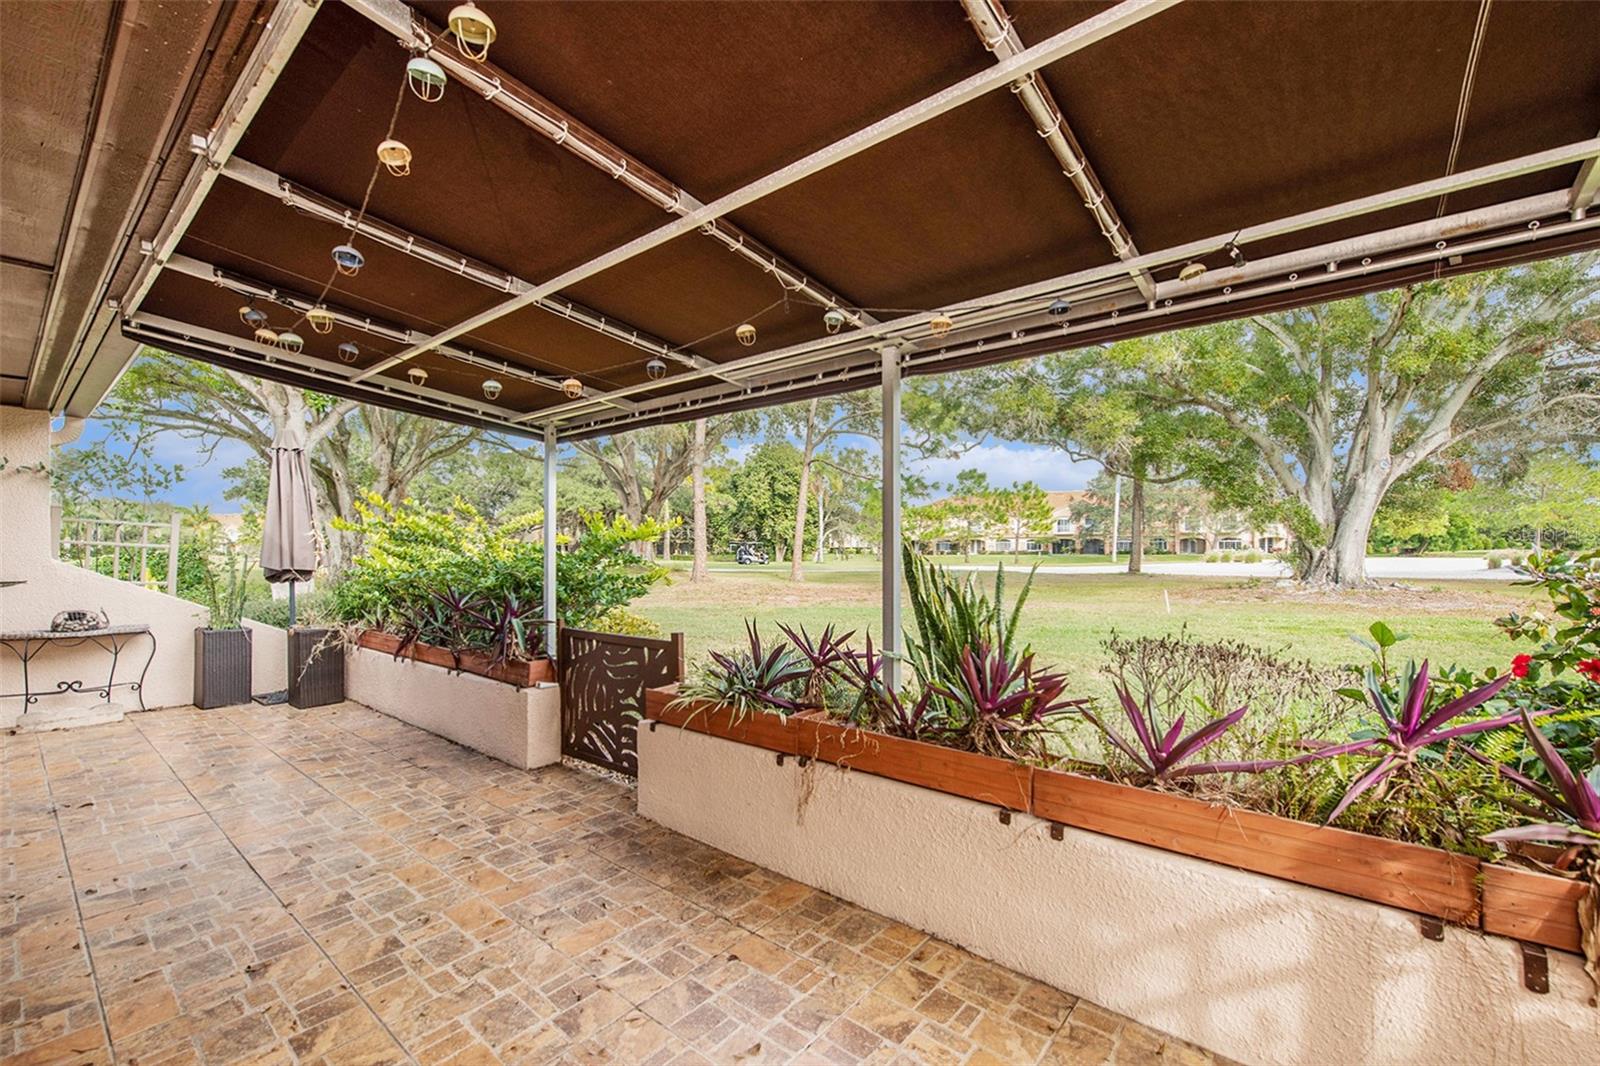 Covered patio overlooking the 7th Fairway of the Pasadena Yacht Club golfcourse